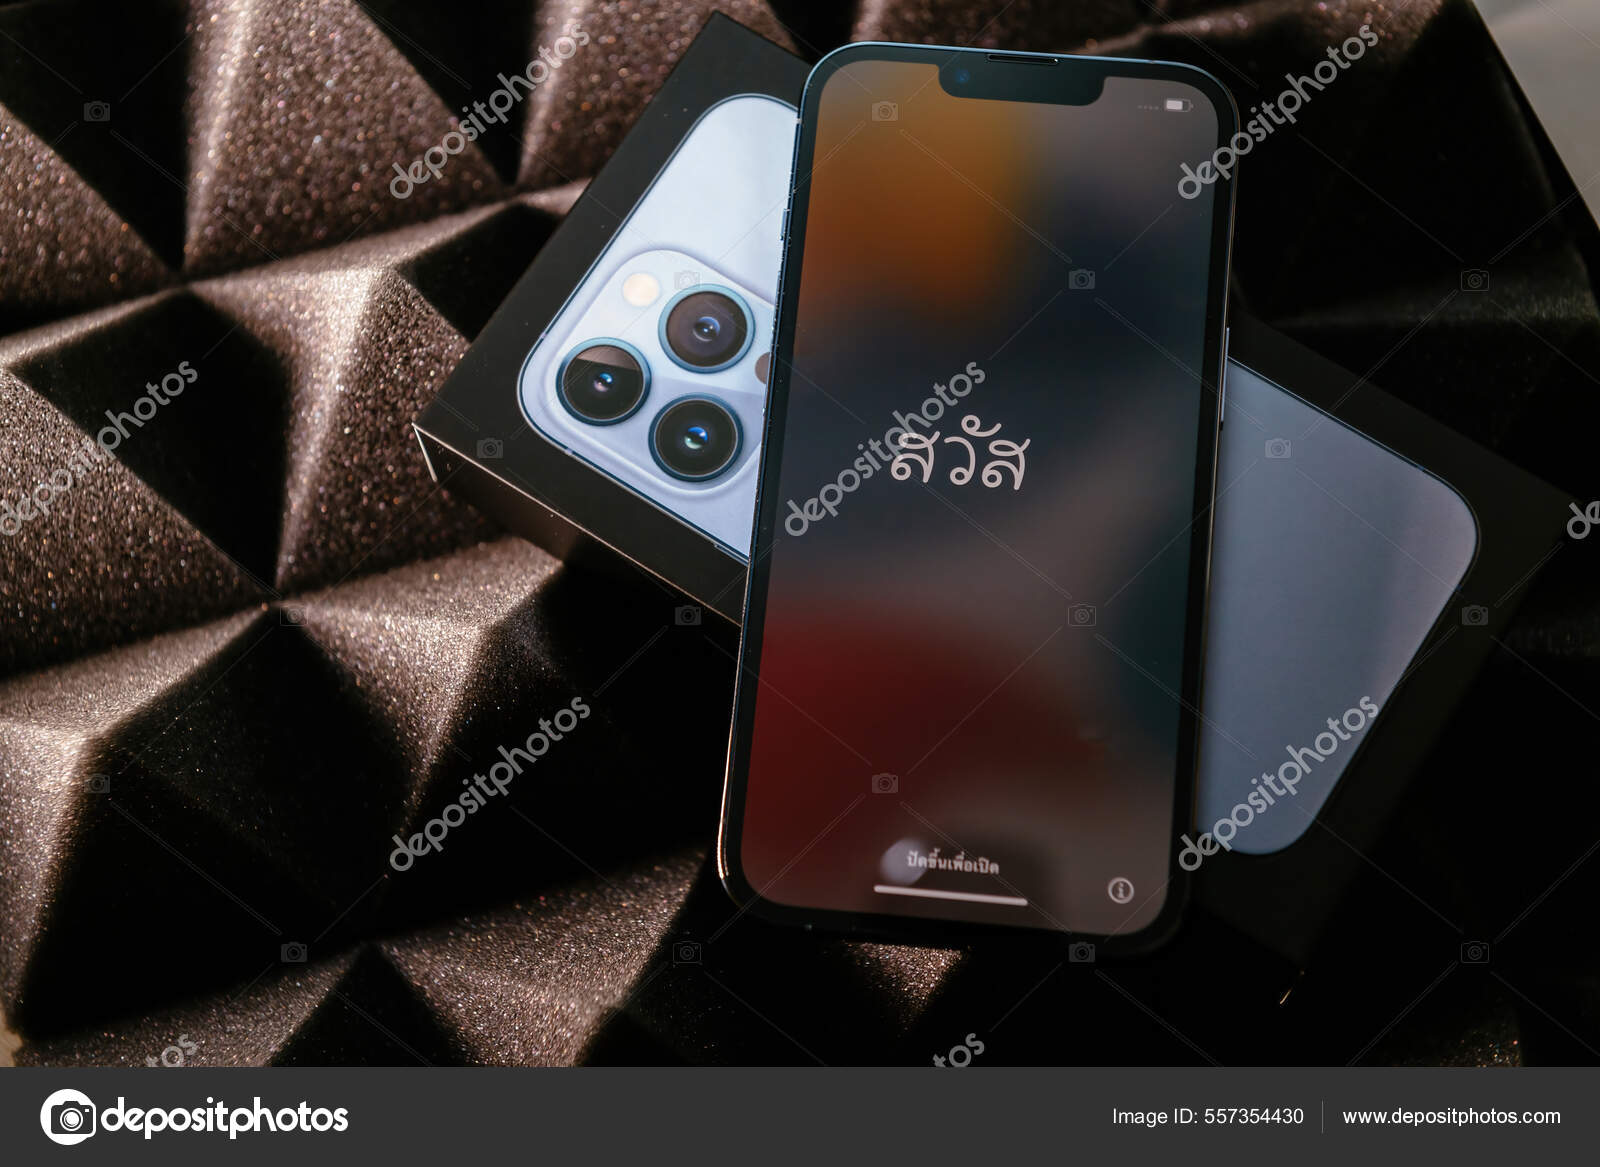 Unboxing of new iPhone 13 Pro Max Sierra Blue new color on tech background  – Stock Editorial Photo © ifeelstock #557354430